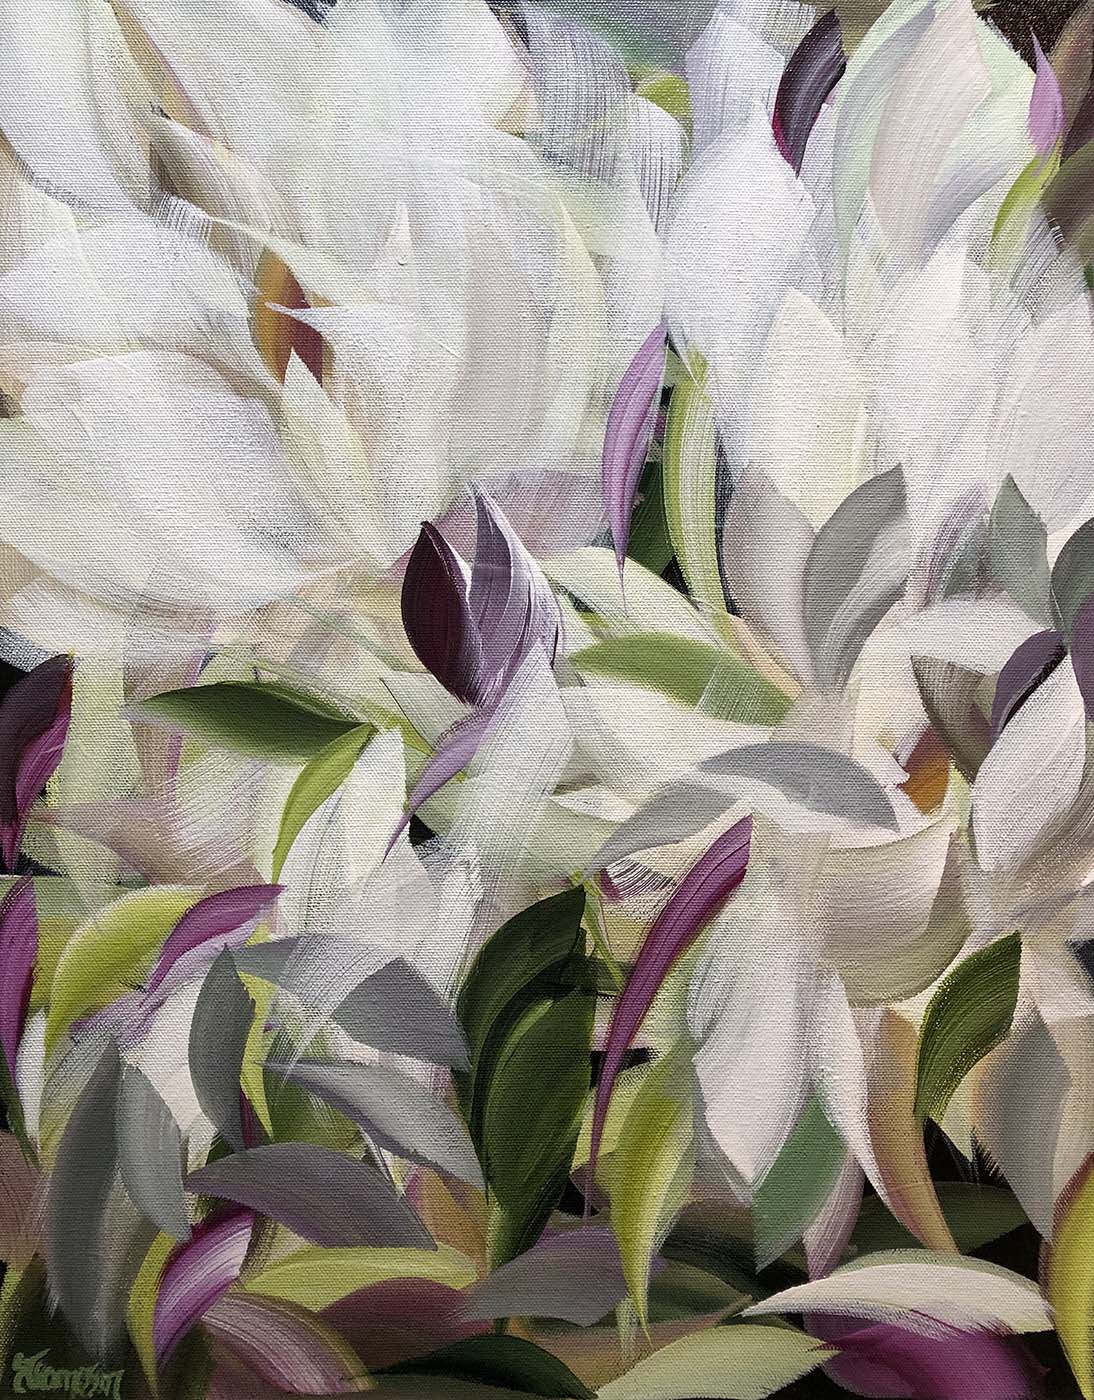 Contemporary art. Title: Sia's Blooms, 20 x 16 in, Acrylic on Canvas by Canadian artist Shirley Thompson.